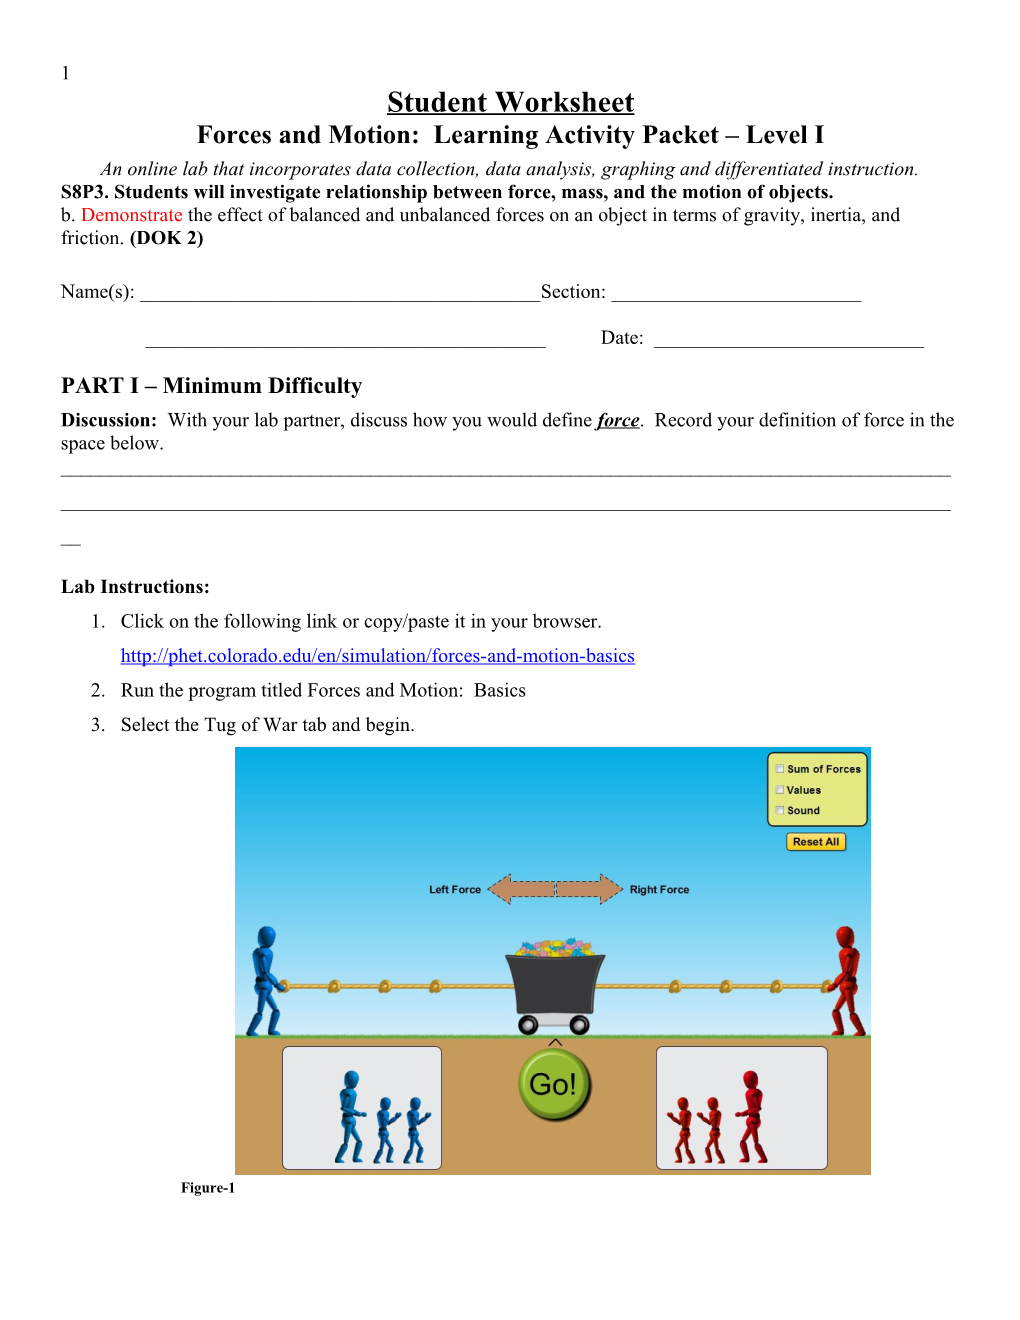 Forces and Motion: Learning Activity Packet Level I